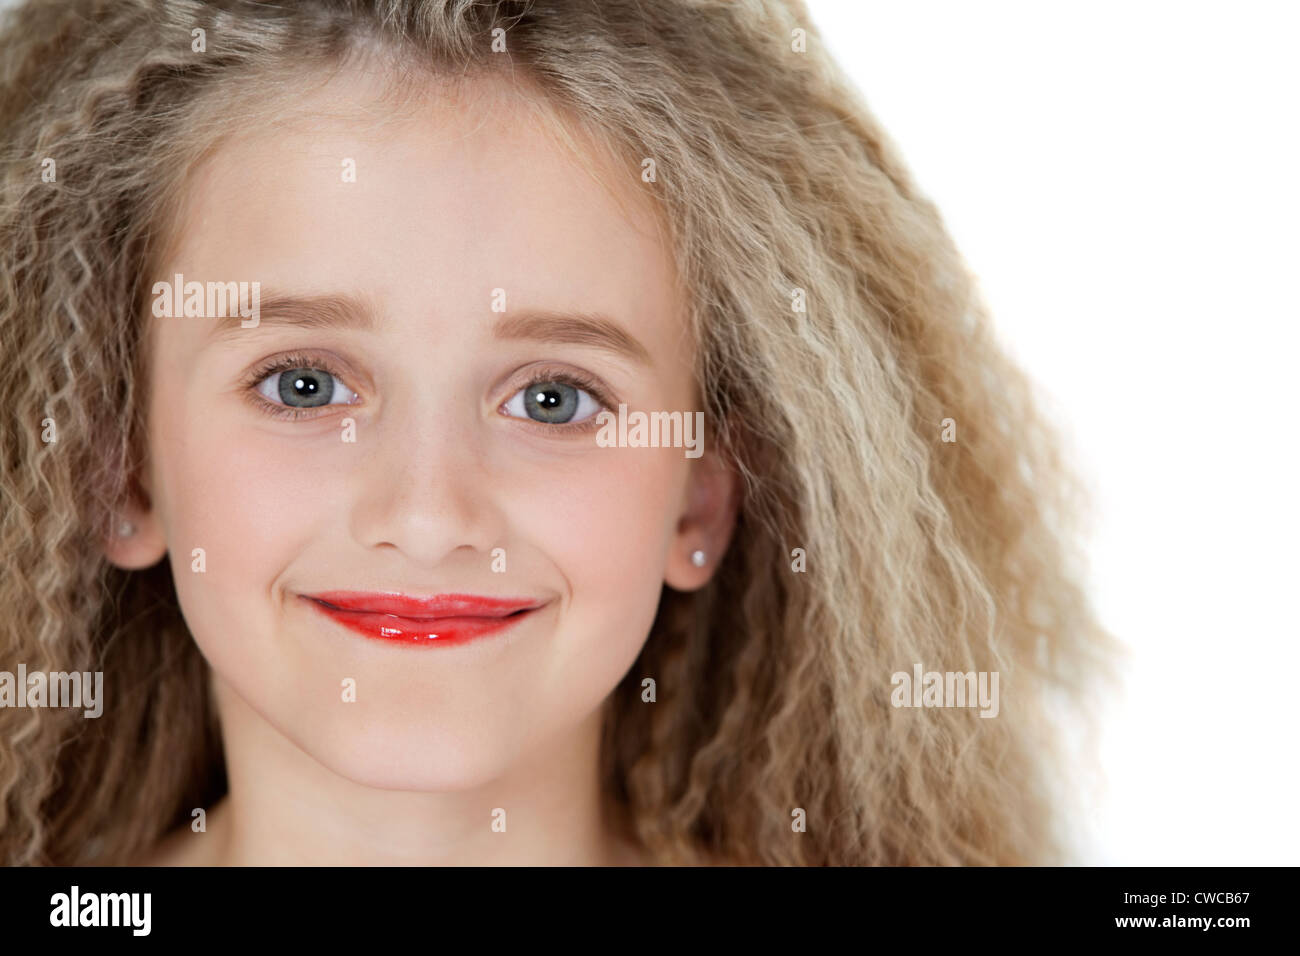 Close-up portrait of blond girl wearing red lipstick Stock Photo